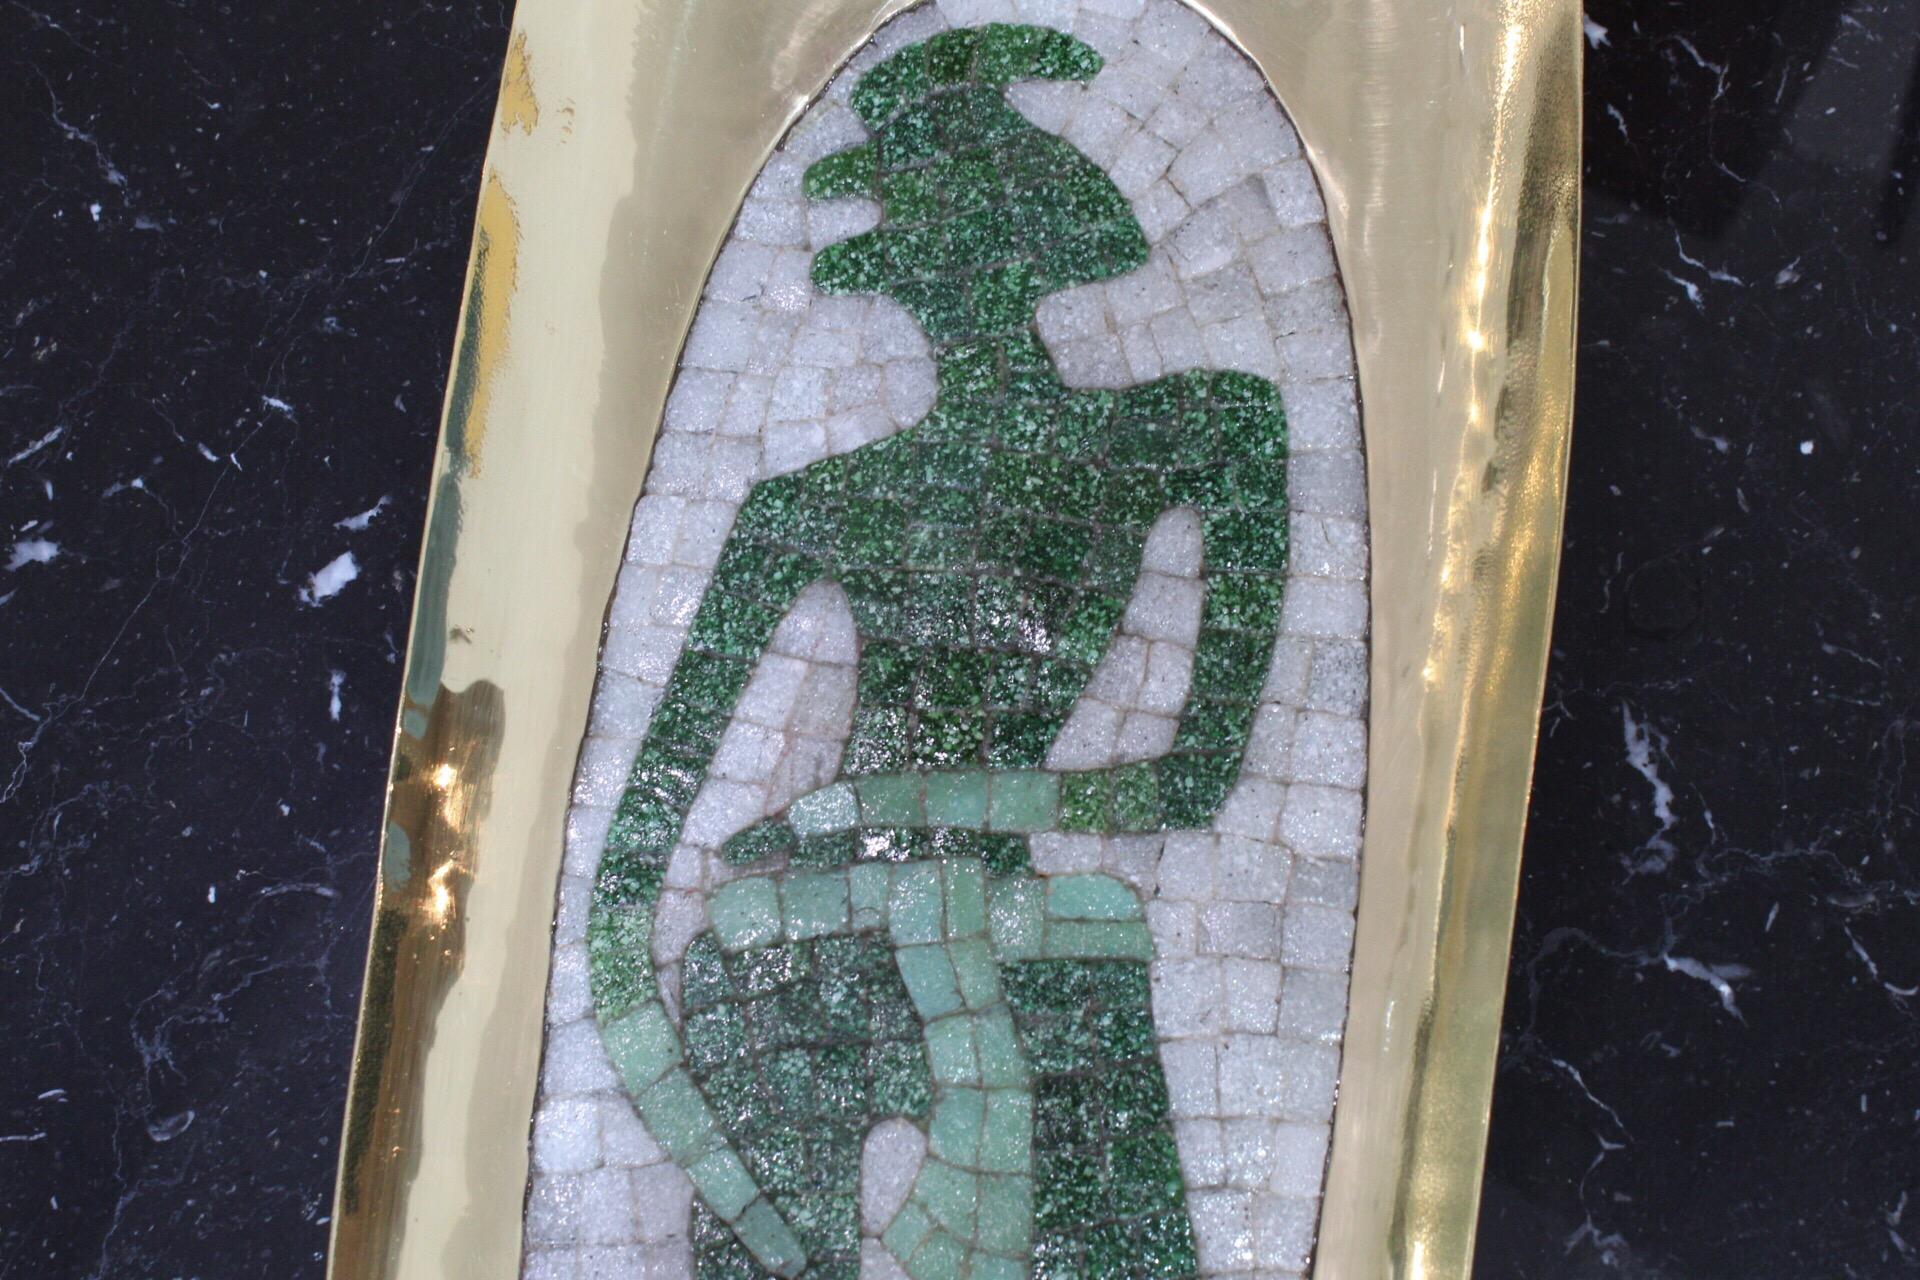 Salvador Teran mosaic and brass tray. Born in Taxco, Salvador Teran (1920-1974) trained with Spratling at Las Delicias, then from 1939 worked with his cousins Los Castillo at their taller before moving to Mexico City and setting up on his own there